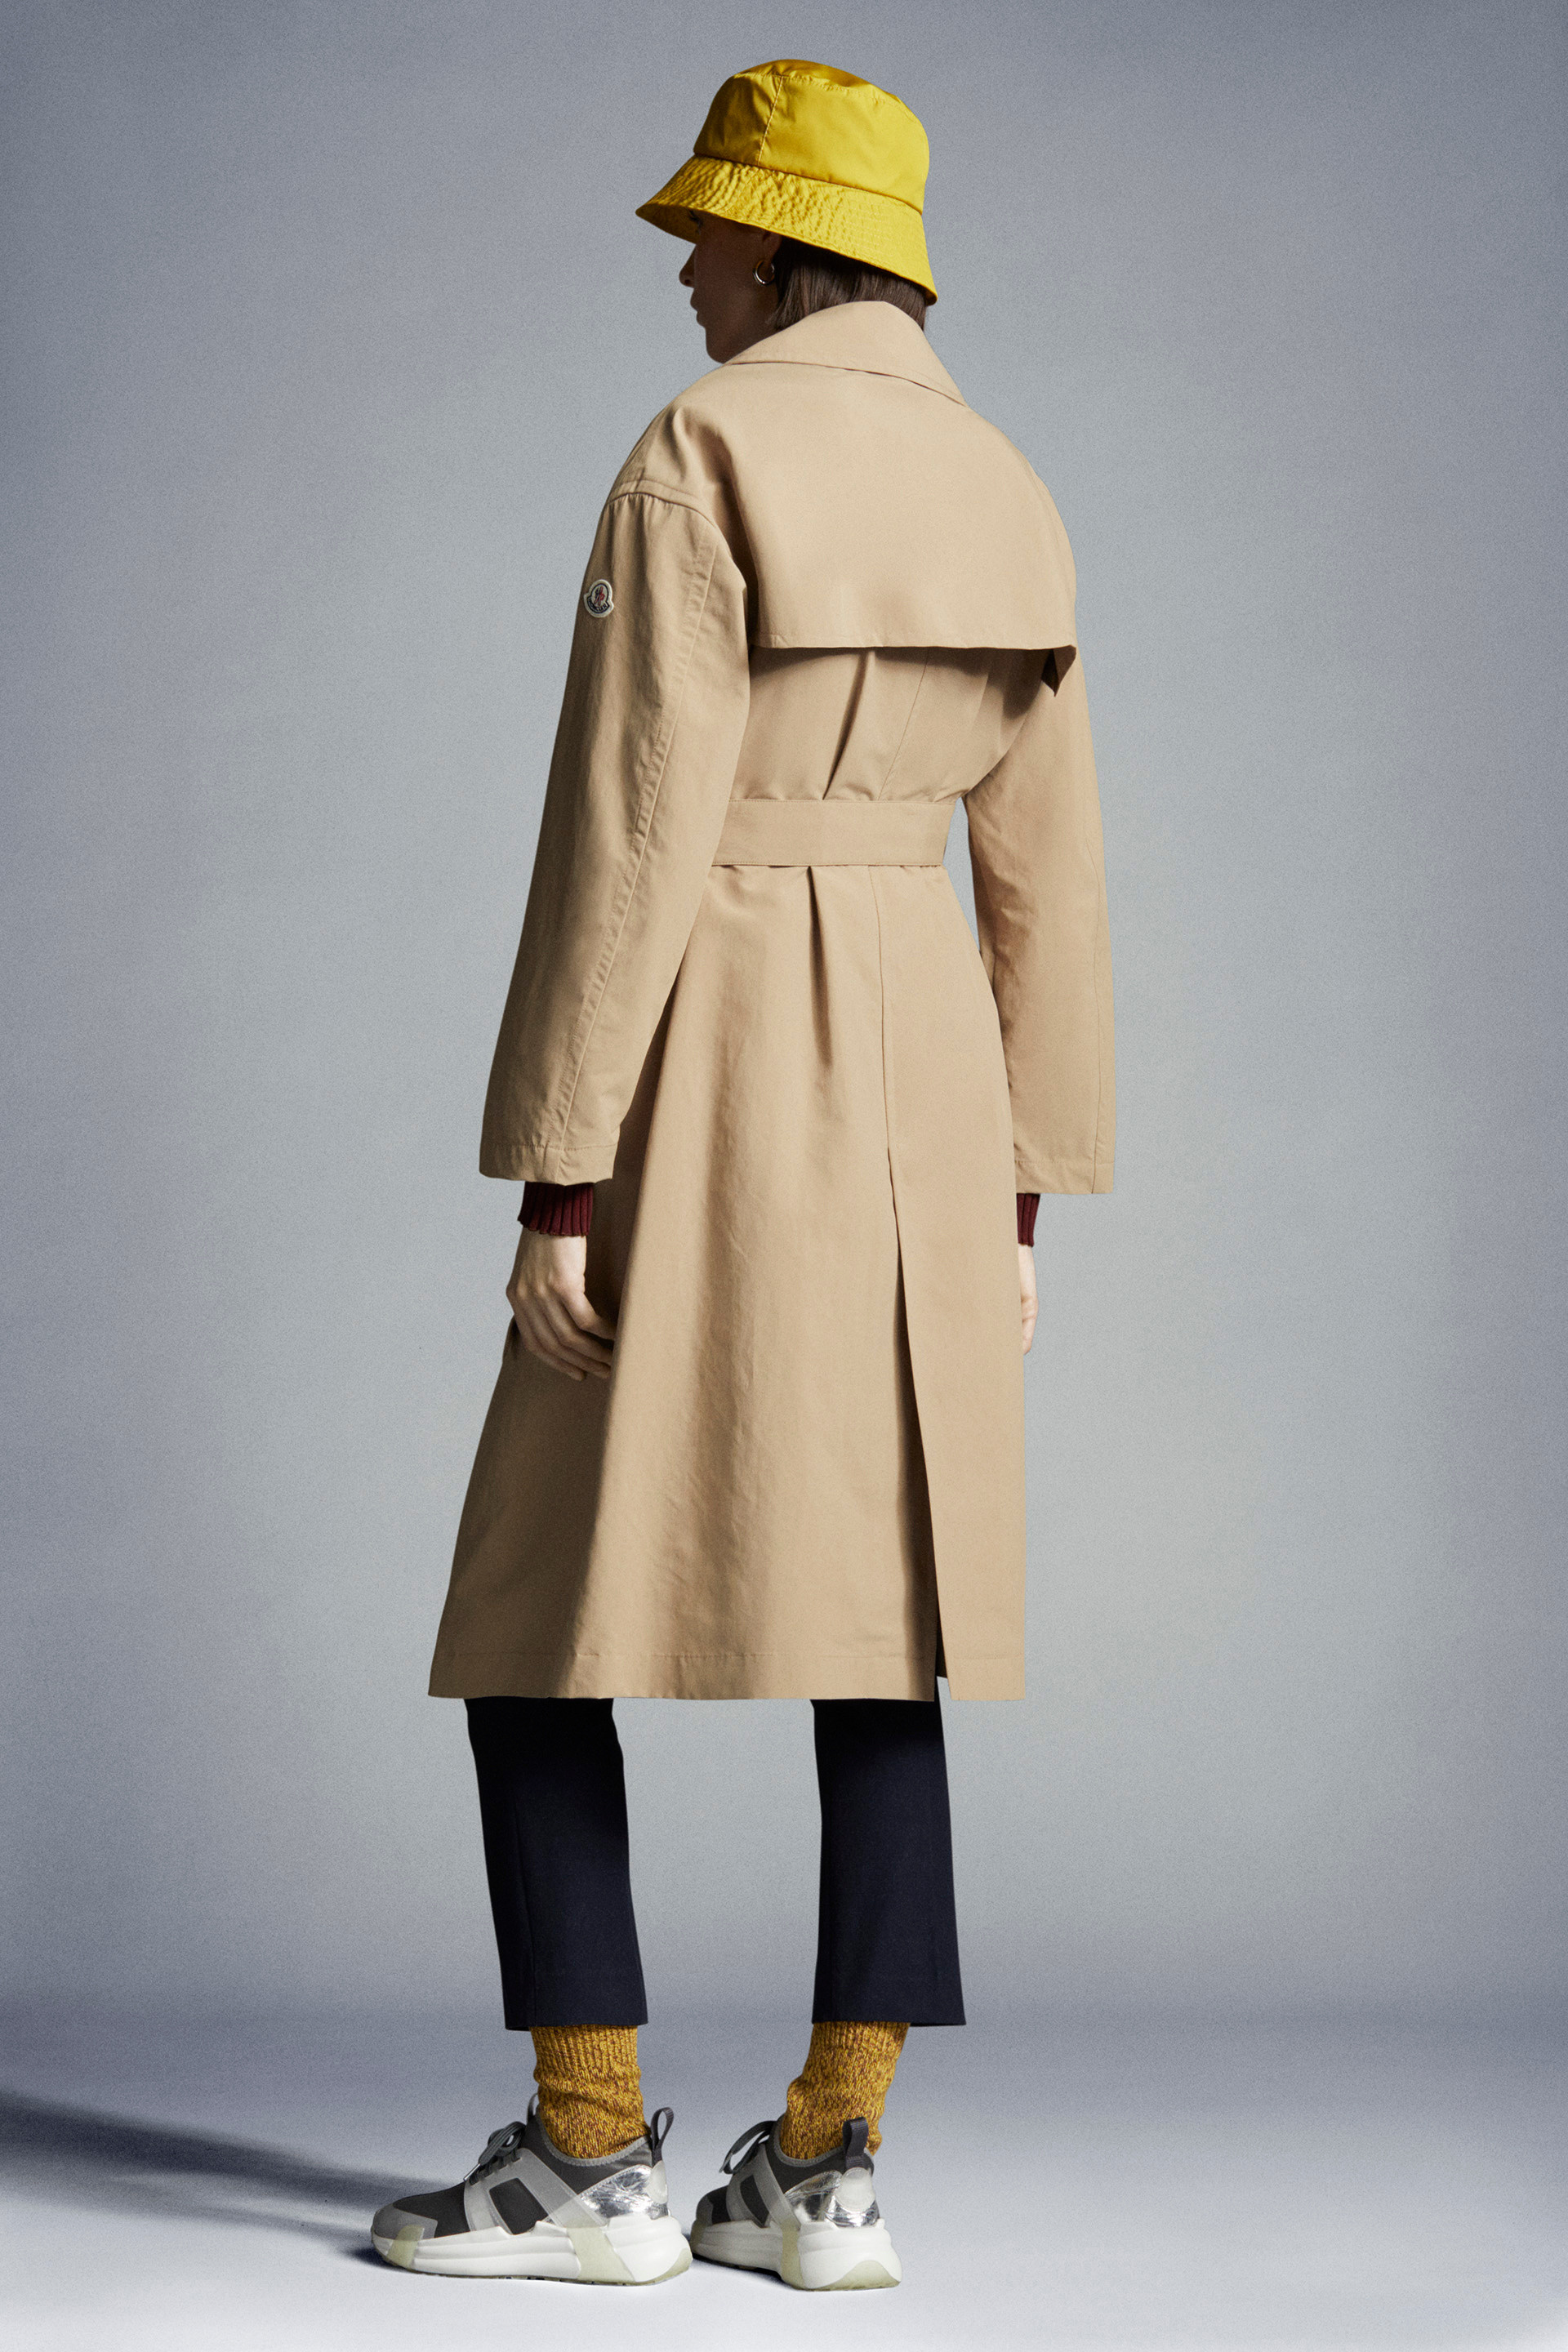 Mode Manteaux Trenchcoats Moncler Trenchcoat rose chair style d\u00e9contract\u00e9 